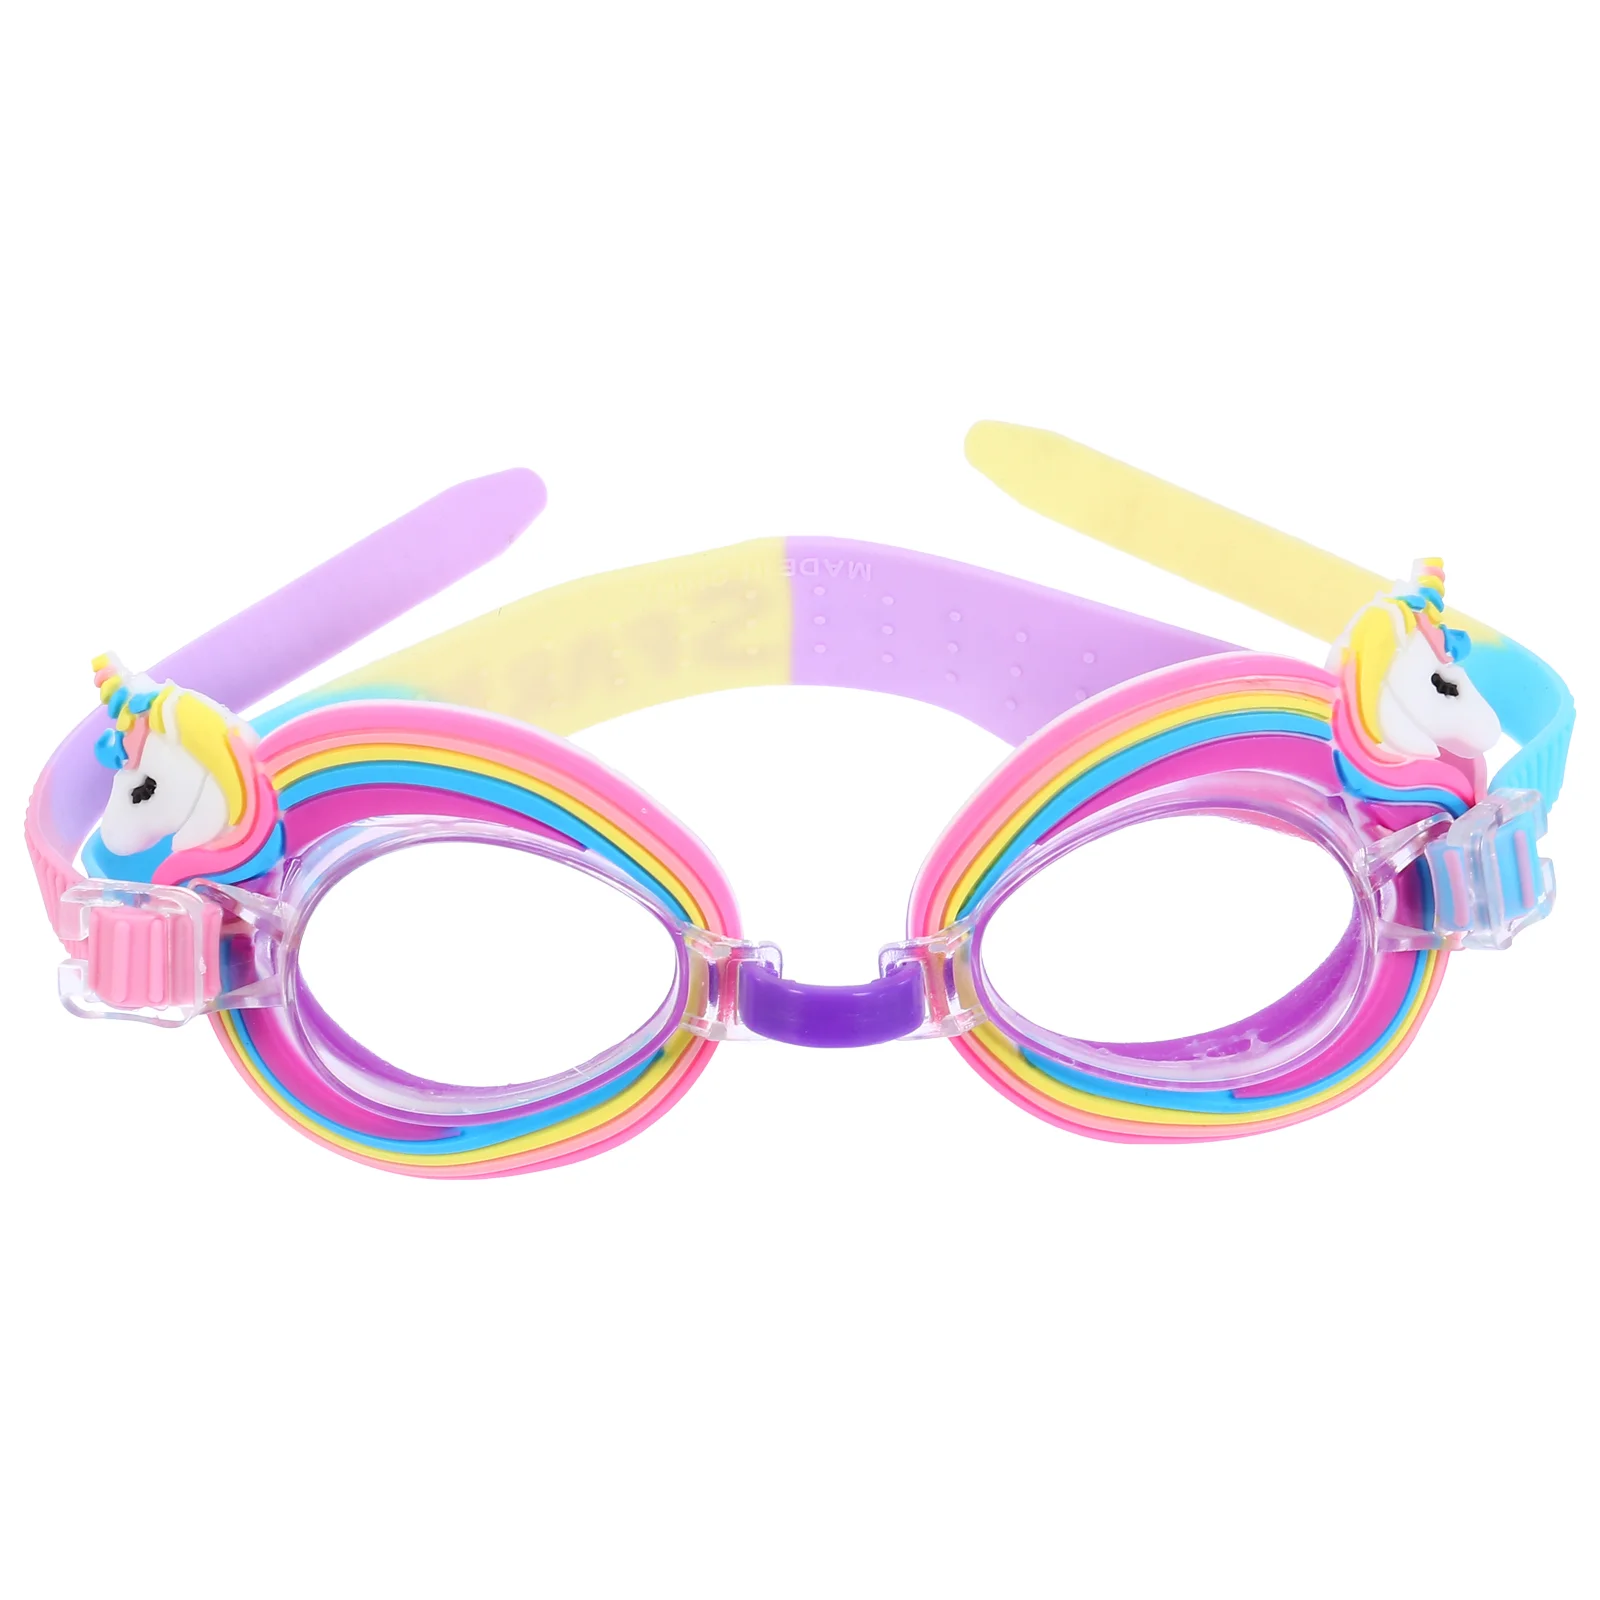 

kids swimming goggles waterproof anti- fog uv resist goggles silicone lovely swim glasses for boys 3- years old